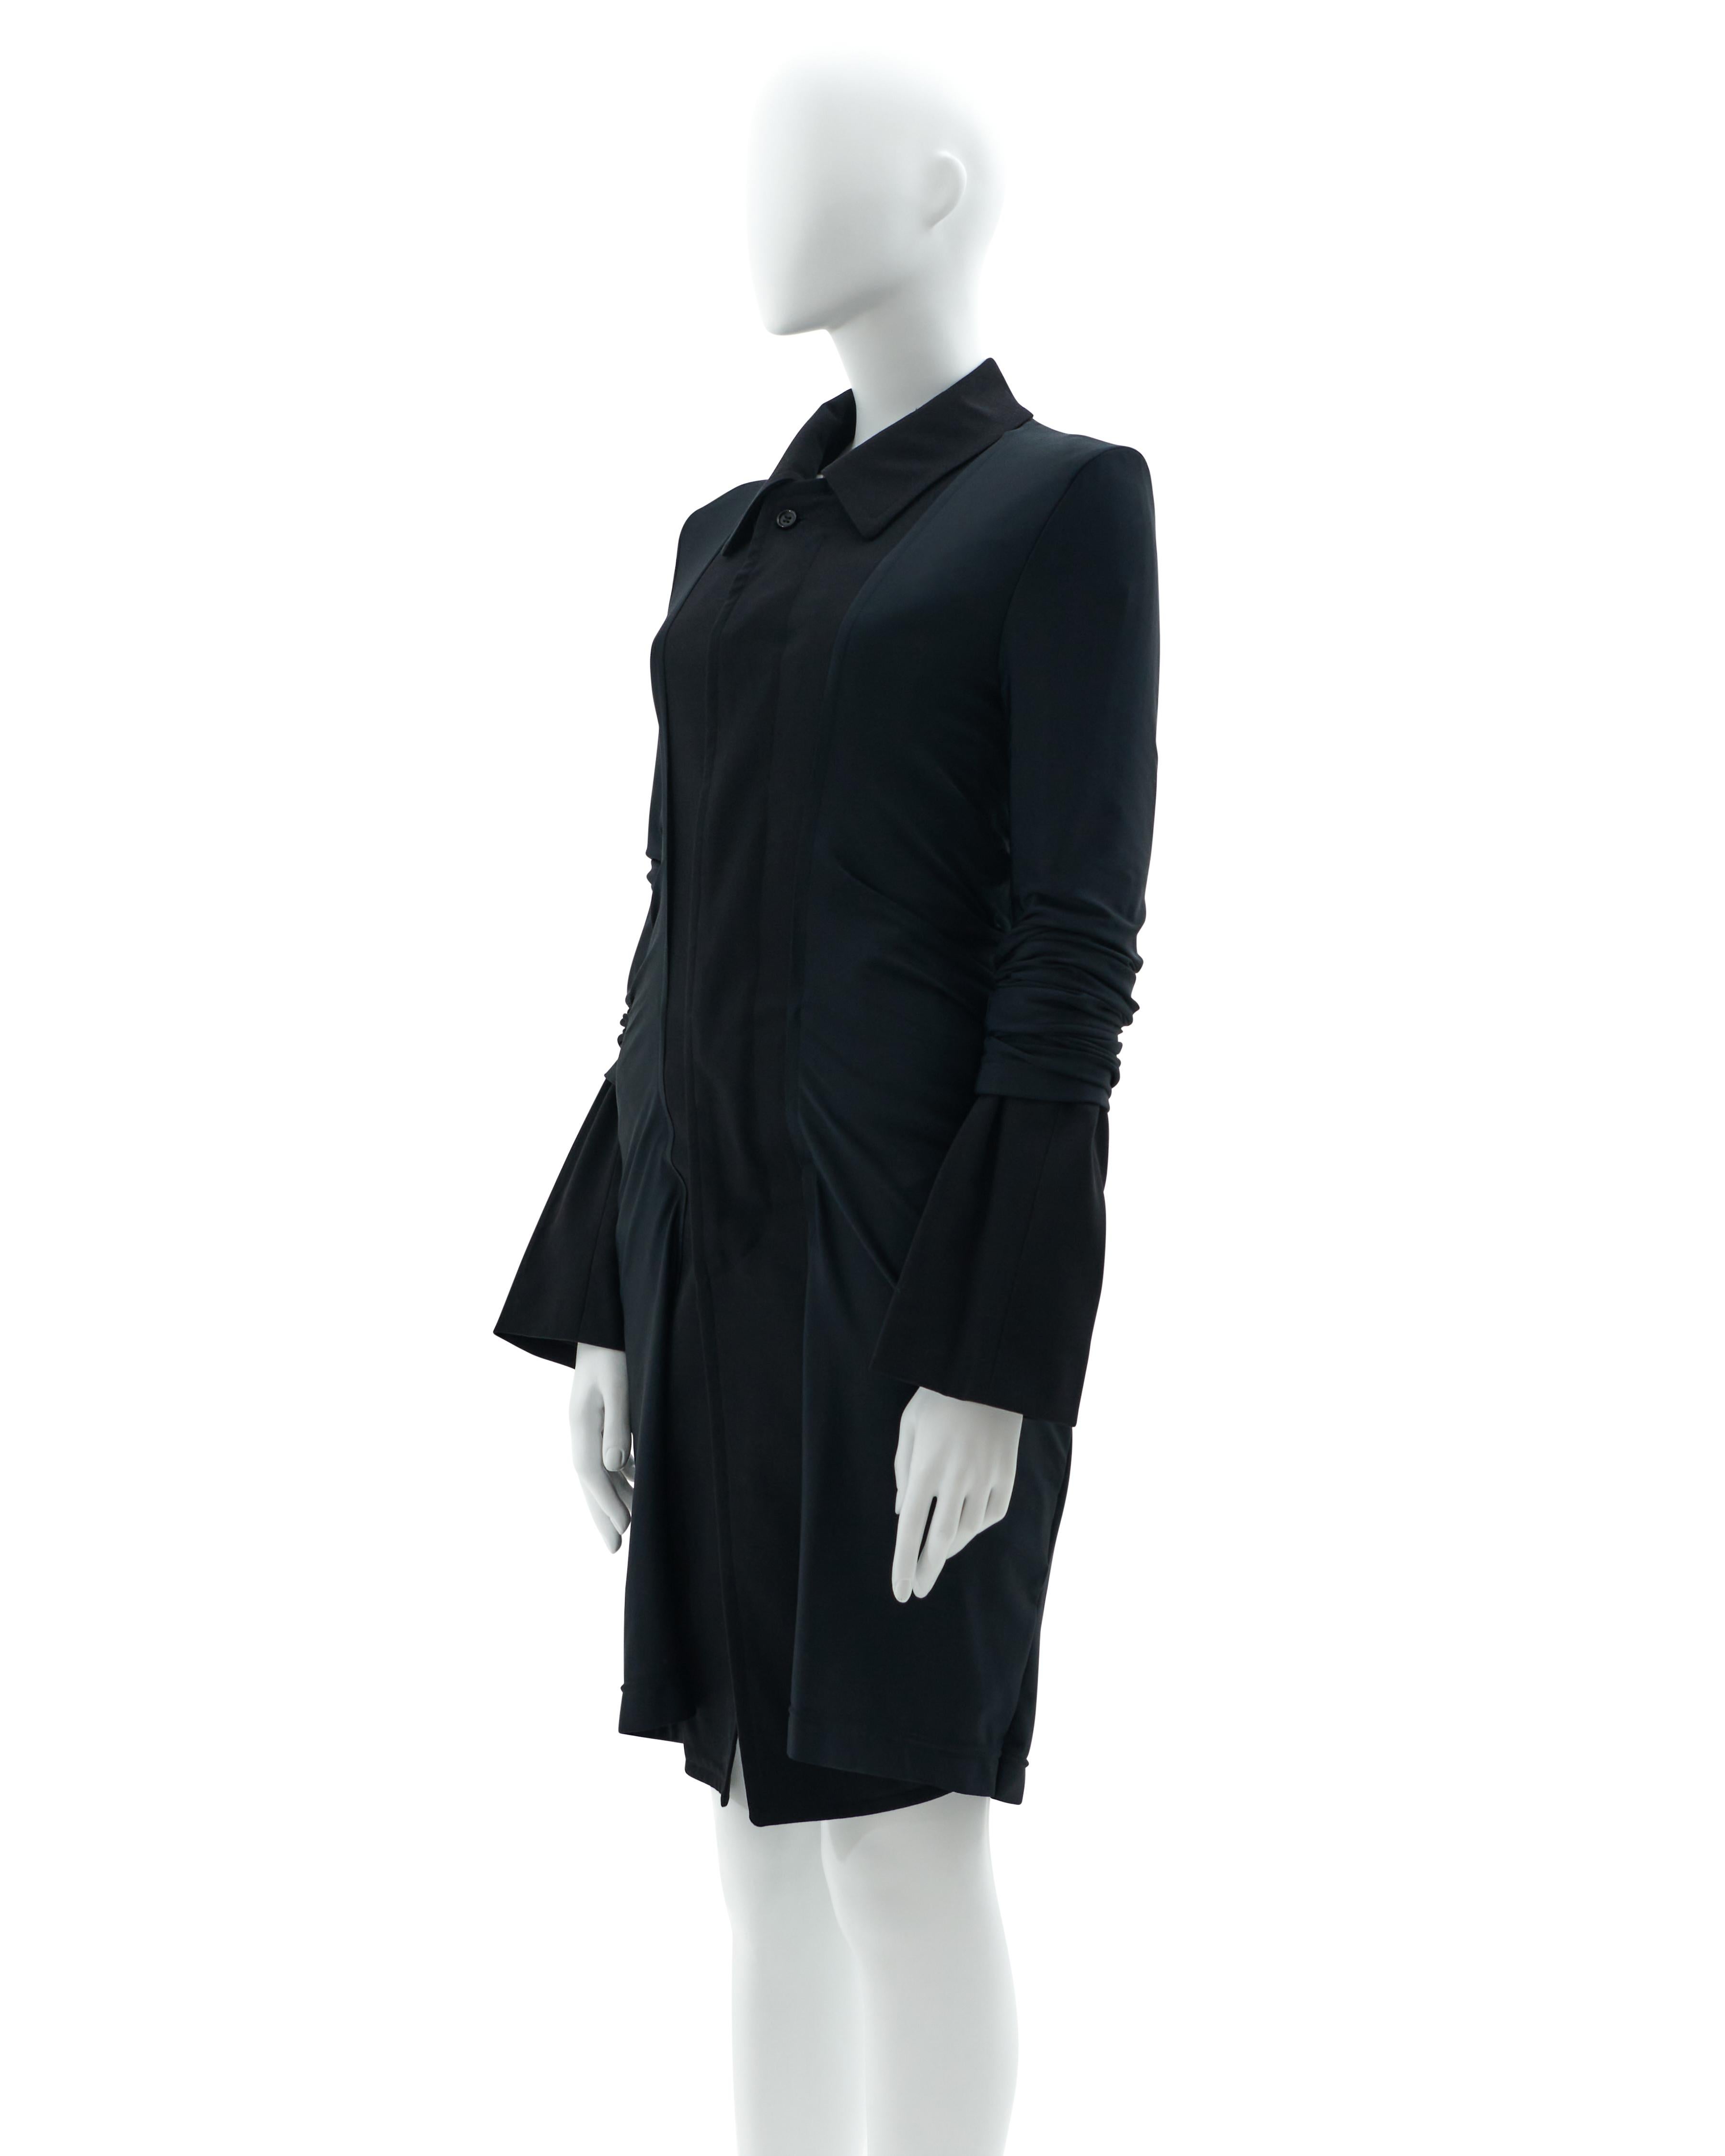 - Fall Winter 2007/08
- Sold by Skof.Archive
- Black and Blue midi coat
- Fitted to the body
- Botton closure 
- Above knee length 
- Made in Japan

Condition: Excellent 

Composition: 
98% wool 
2%Polyester

Size: FR 36 - EN 40 - UK 8 - US 6